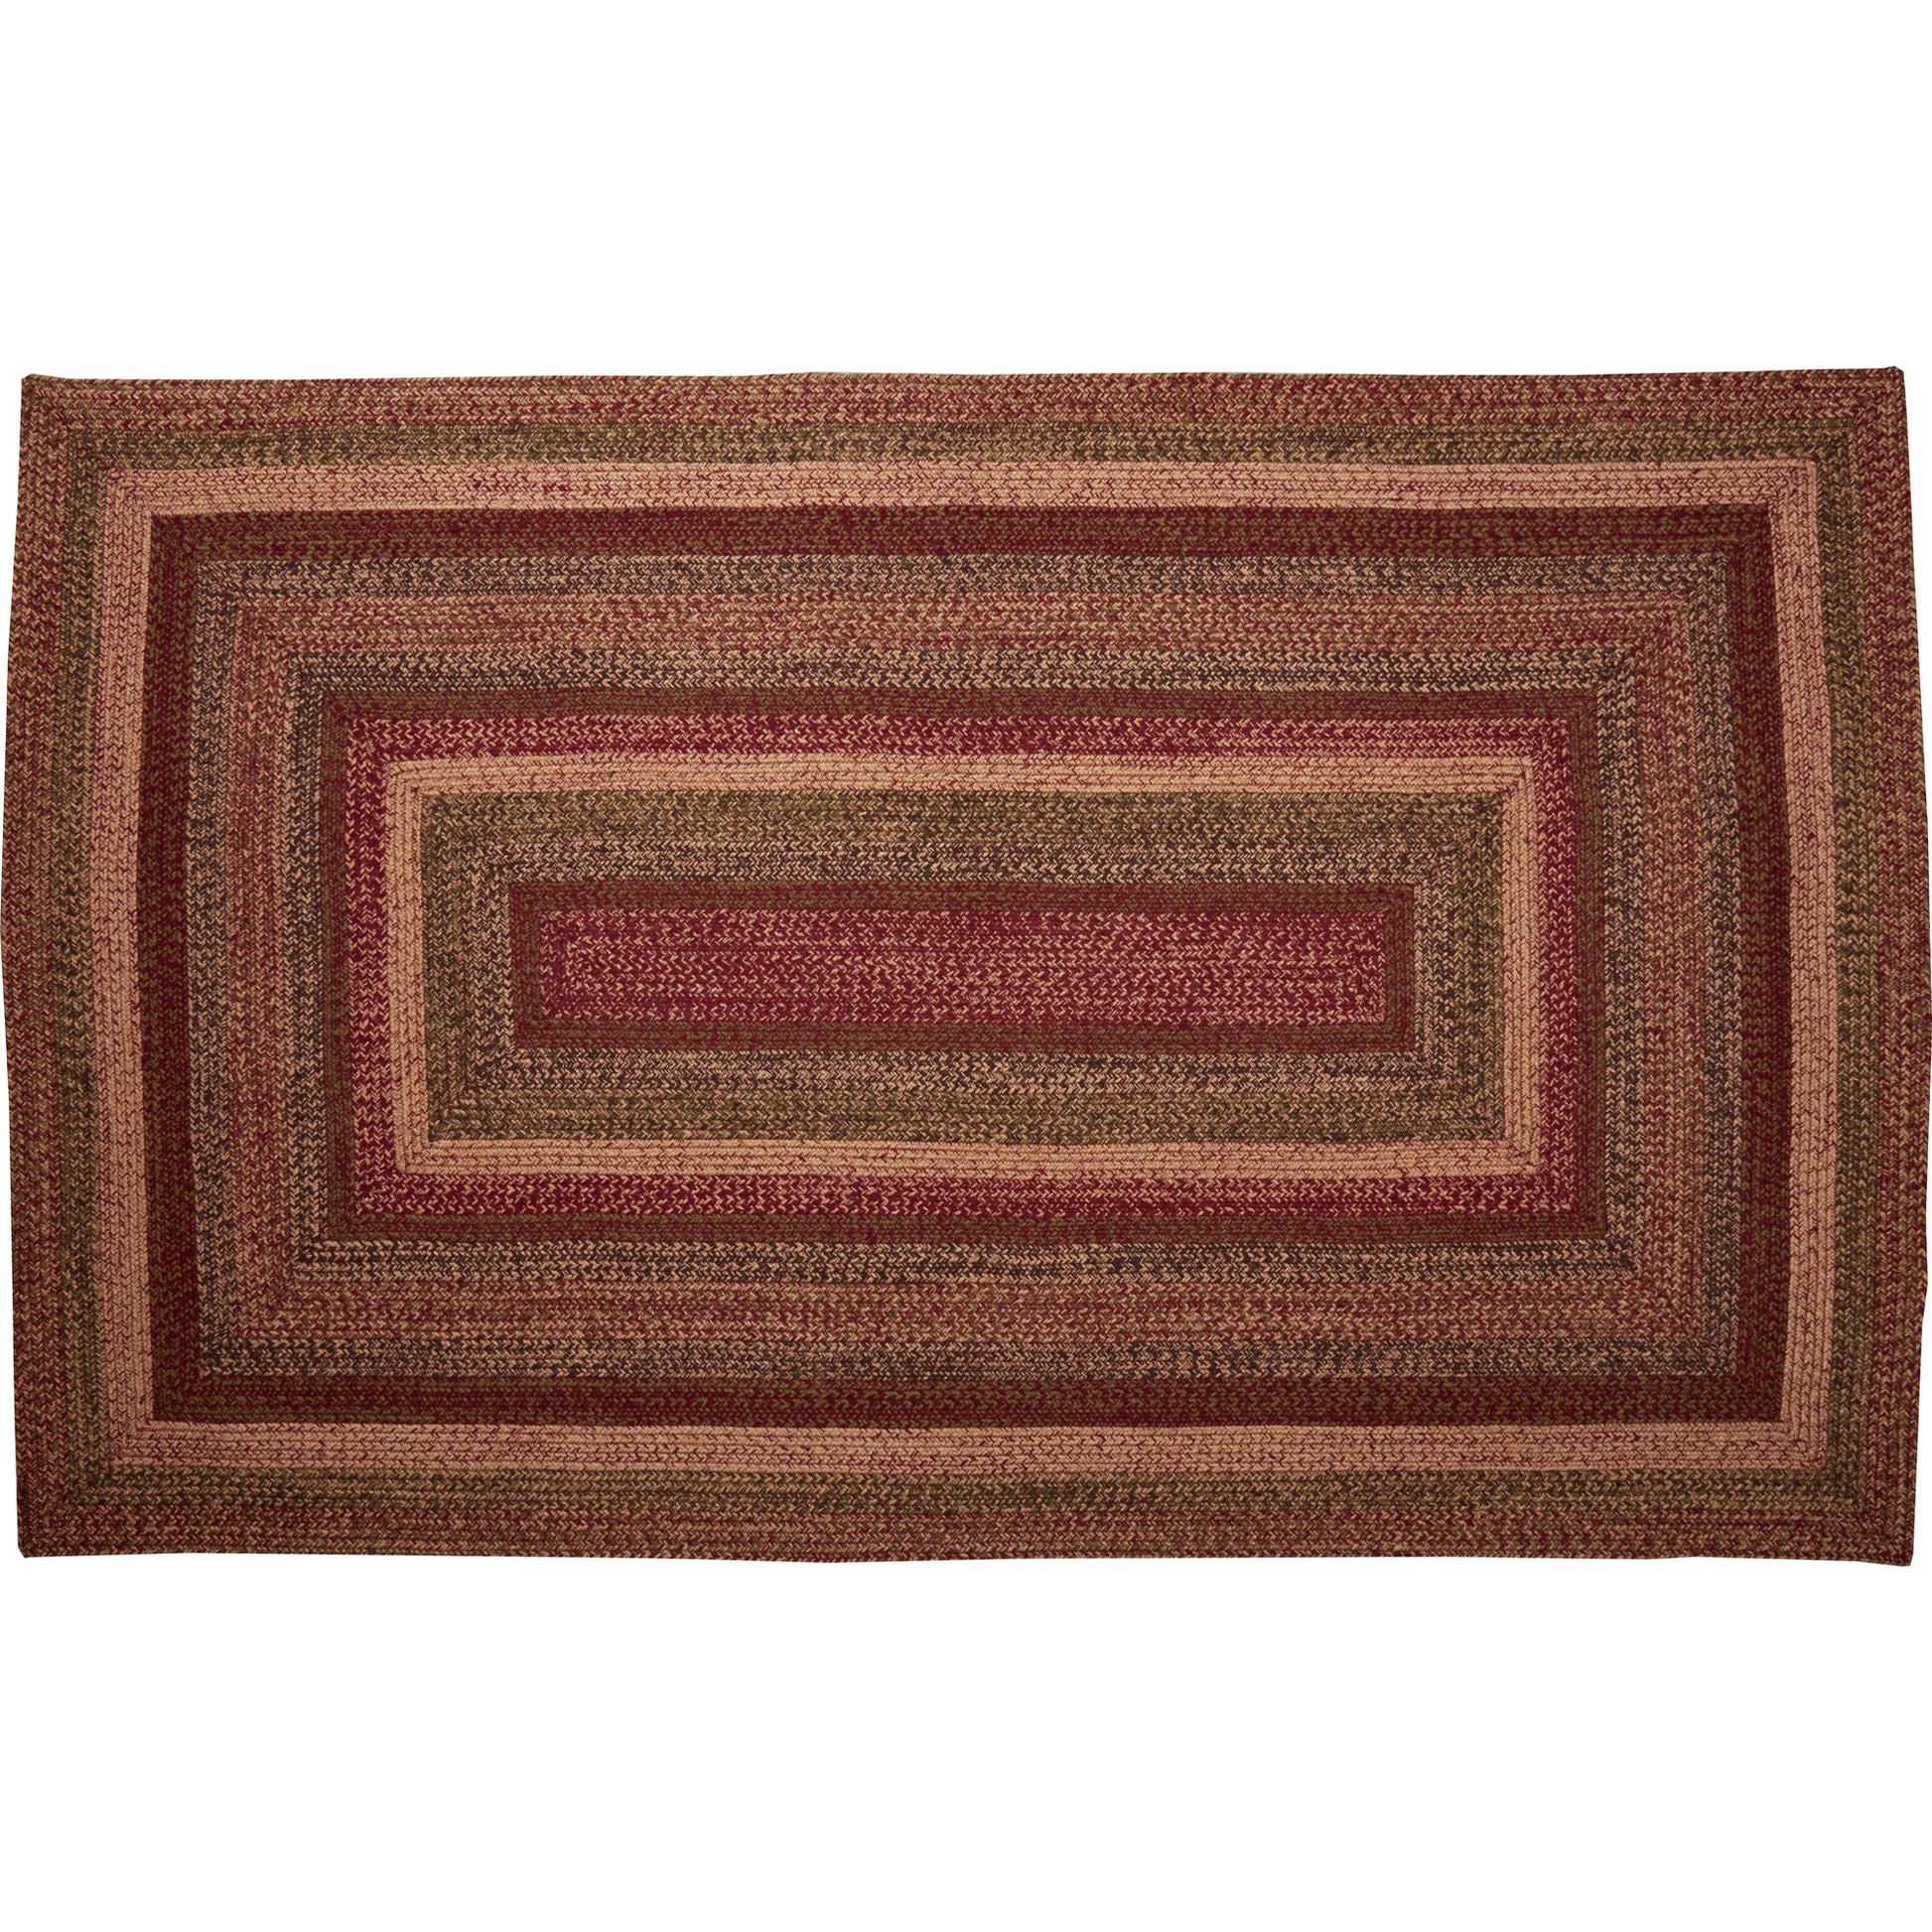 69419-Cider-Mill-Jute-Rug-Rect-w-Pad-60x96-image-6